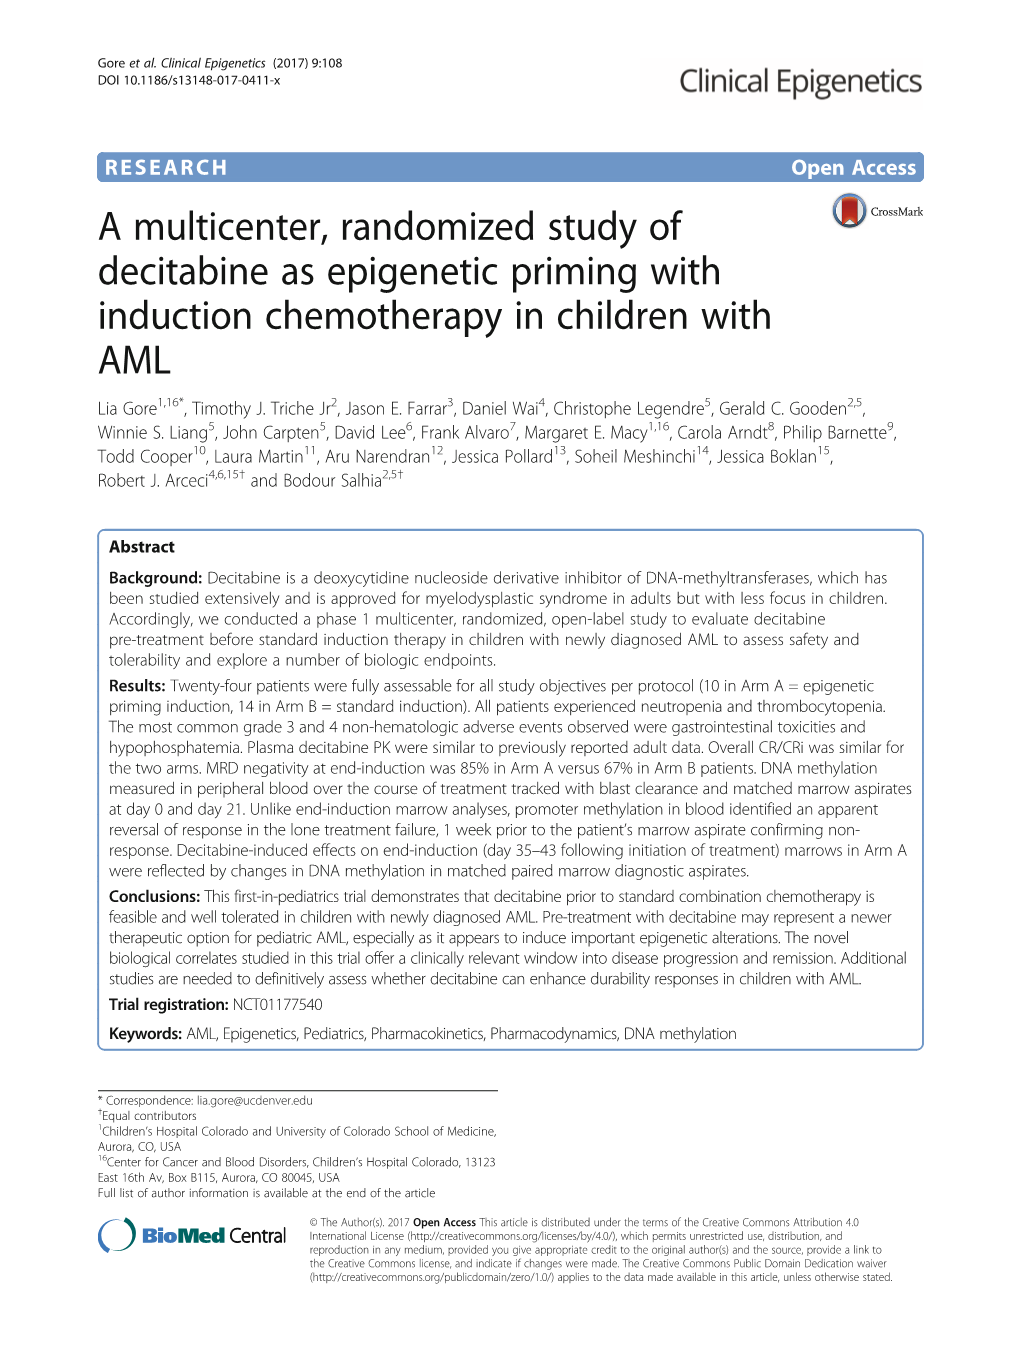 A Multicenter, Randomized Study of Decitabine As Epigenetic Priming with Induction Chemotherapy in Children with AML Lia Gore1,16*, Timothy J